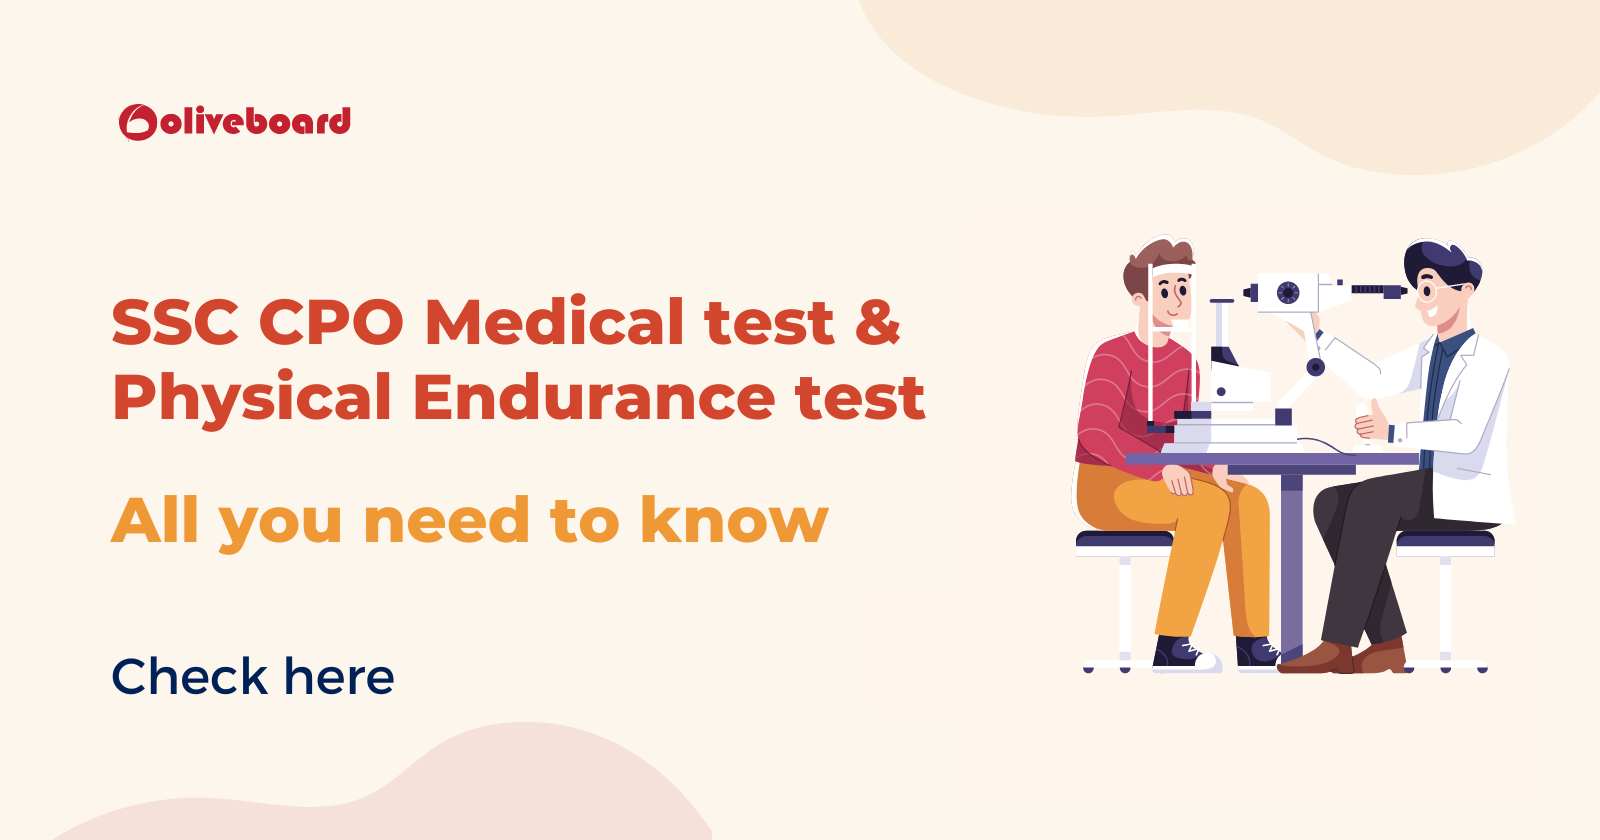 SSC CPO Medical test and Physical Endurance test